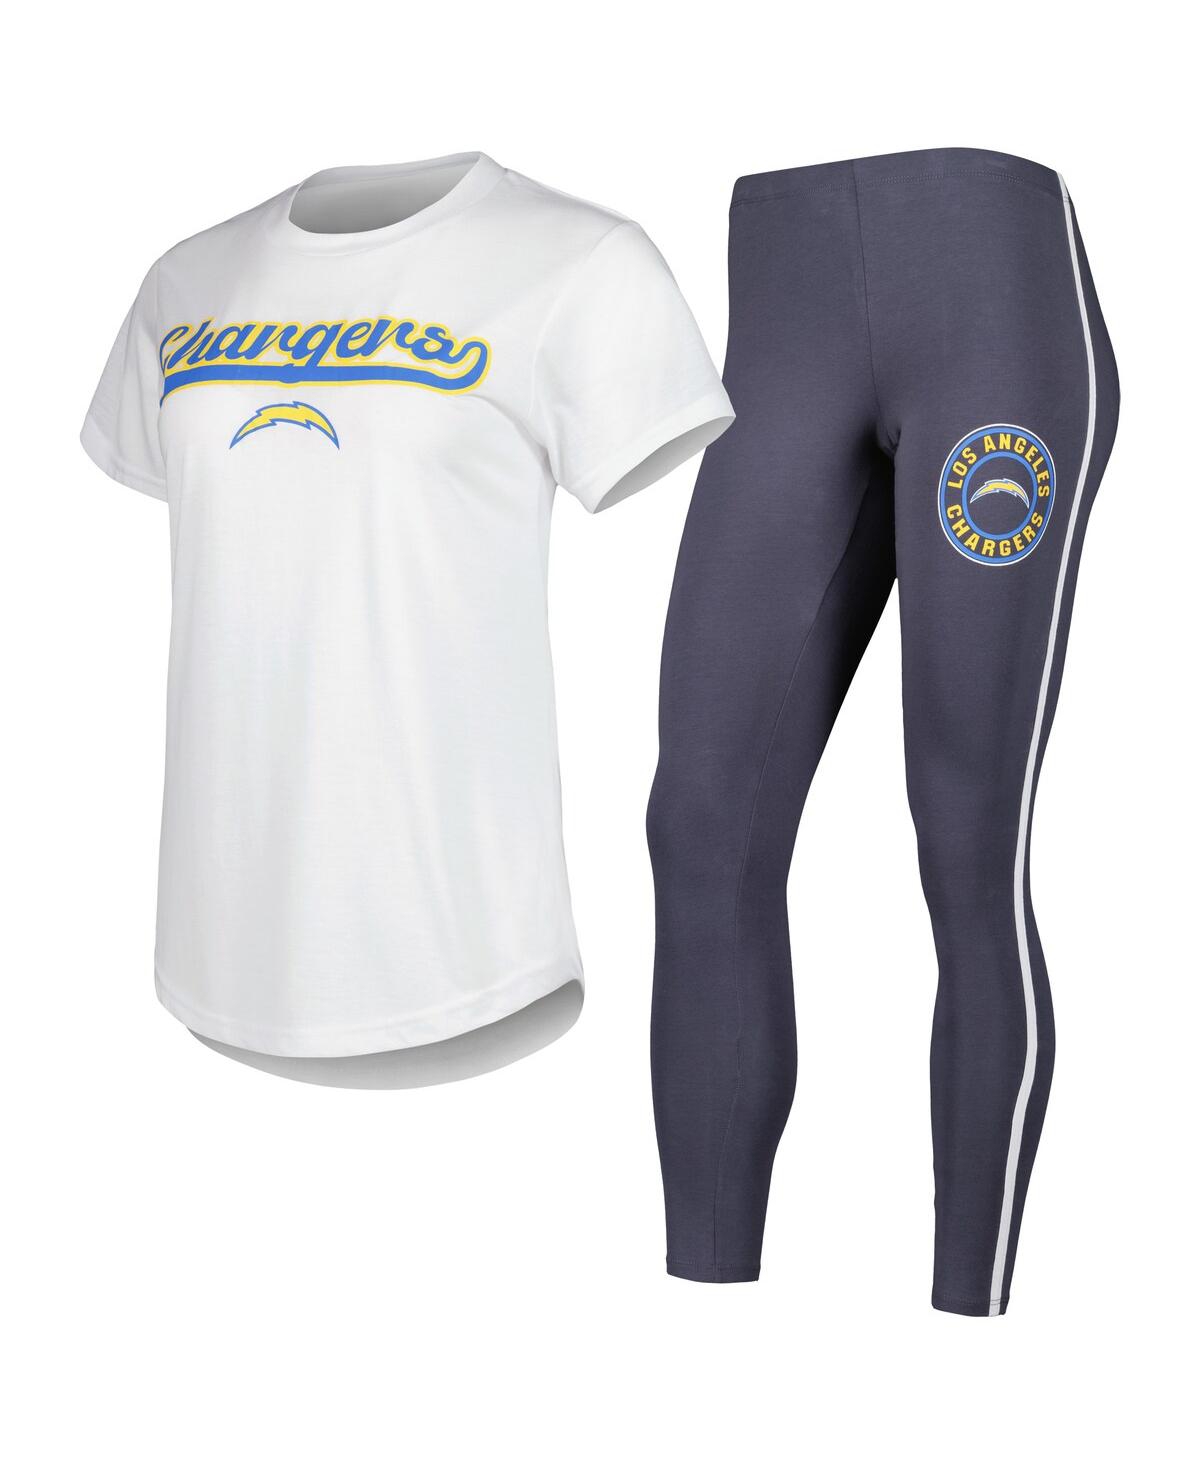 Women's Concepts Sport White, Charcoal Los Angeles Chargers Sonata T-shirt and Leggings Sleep Set - White, Charcoal